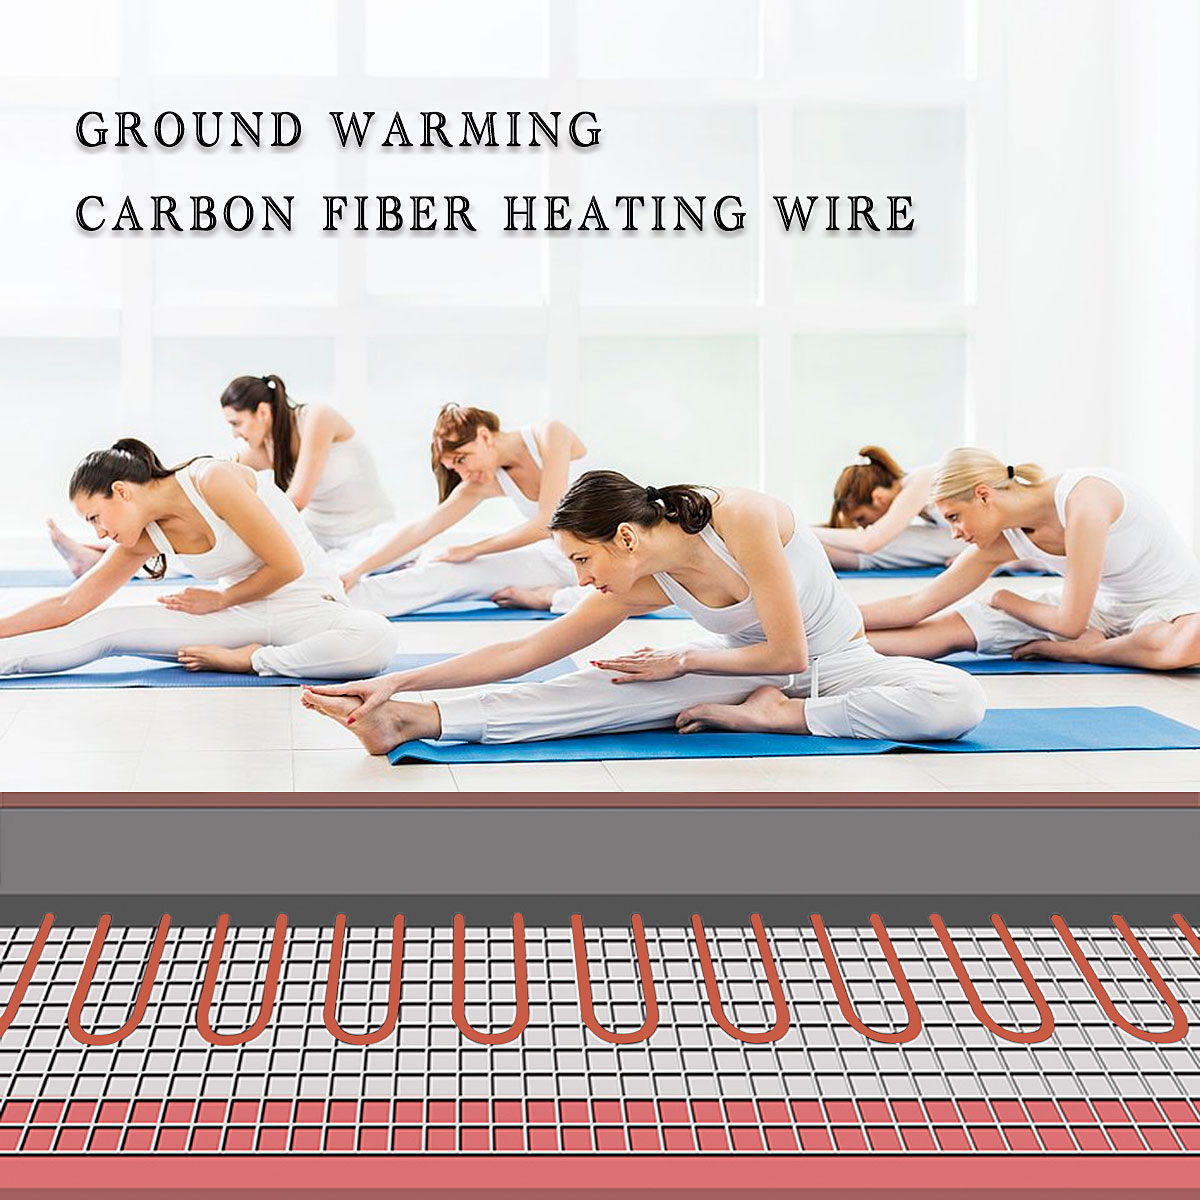 100M Heating Cable Warm Heater Wire Greenhouse Vegetables Farm Heating Equipment Home Floor warm 12k Carbon fiber heating wire